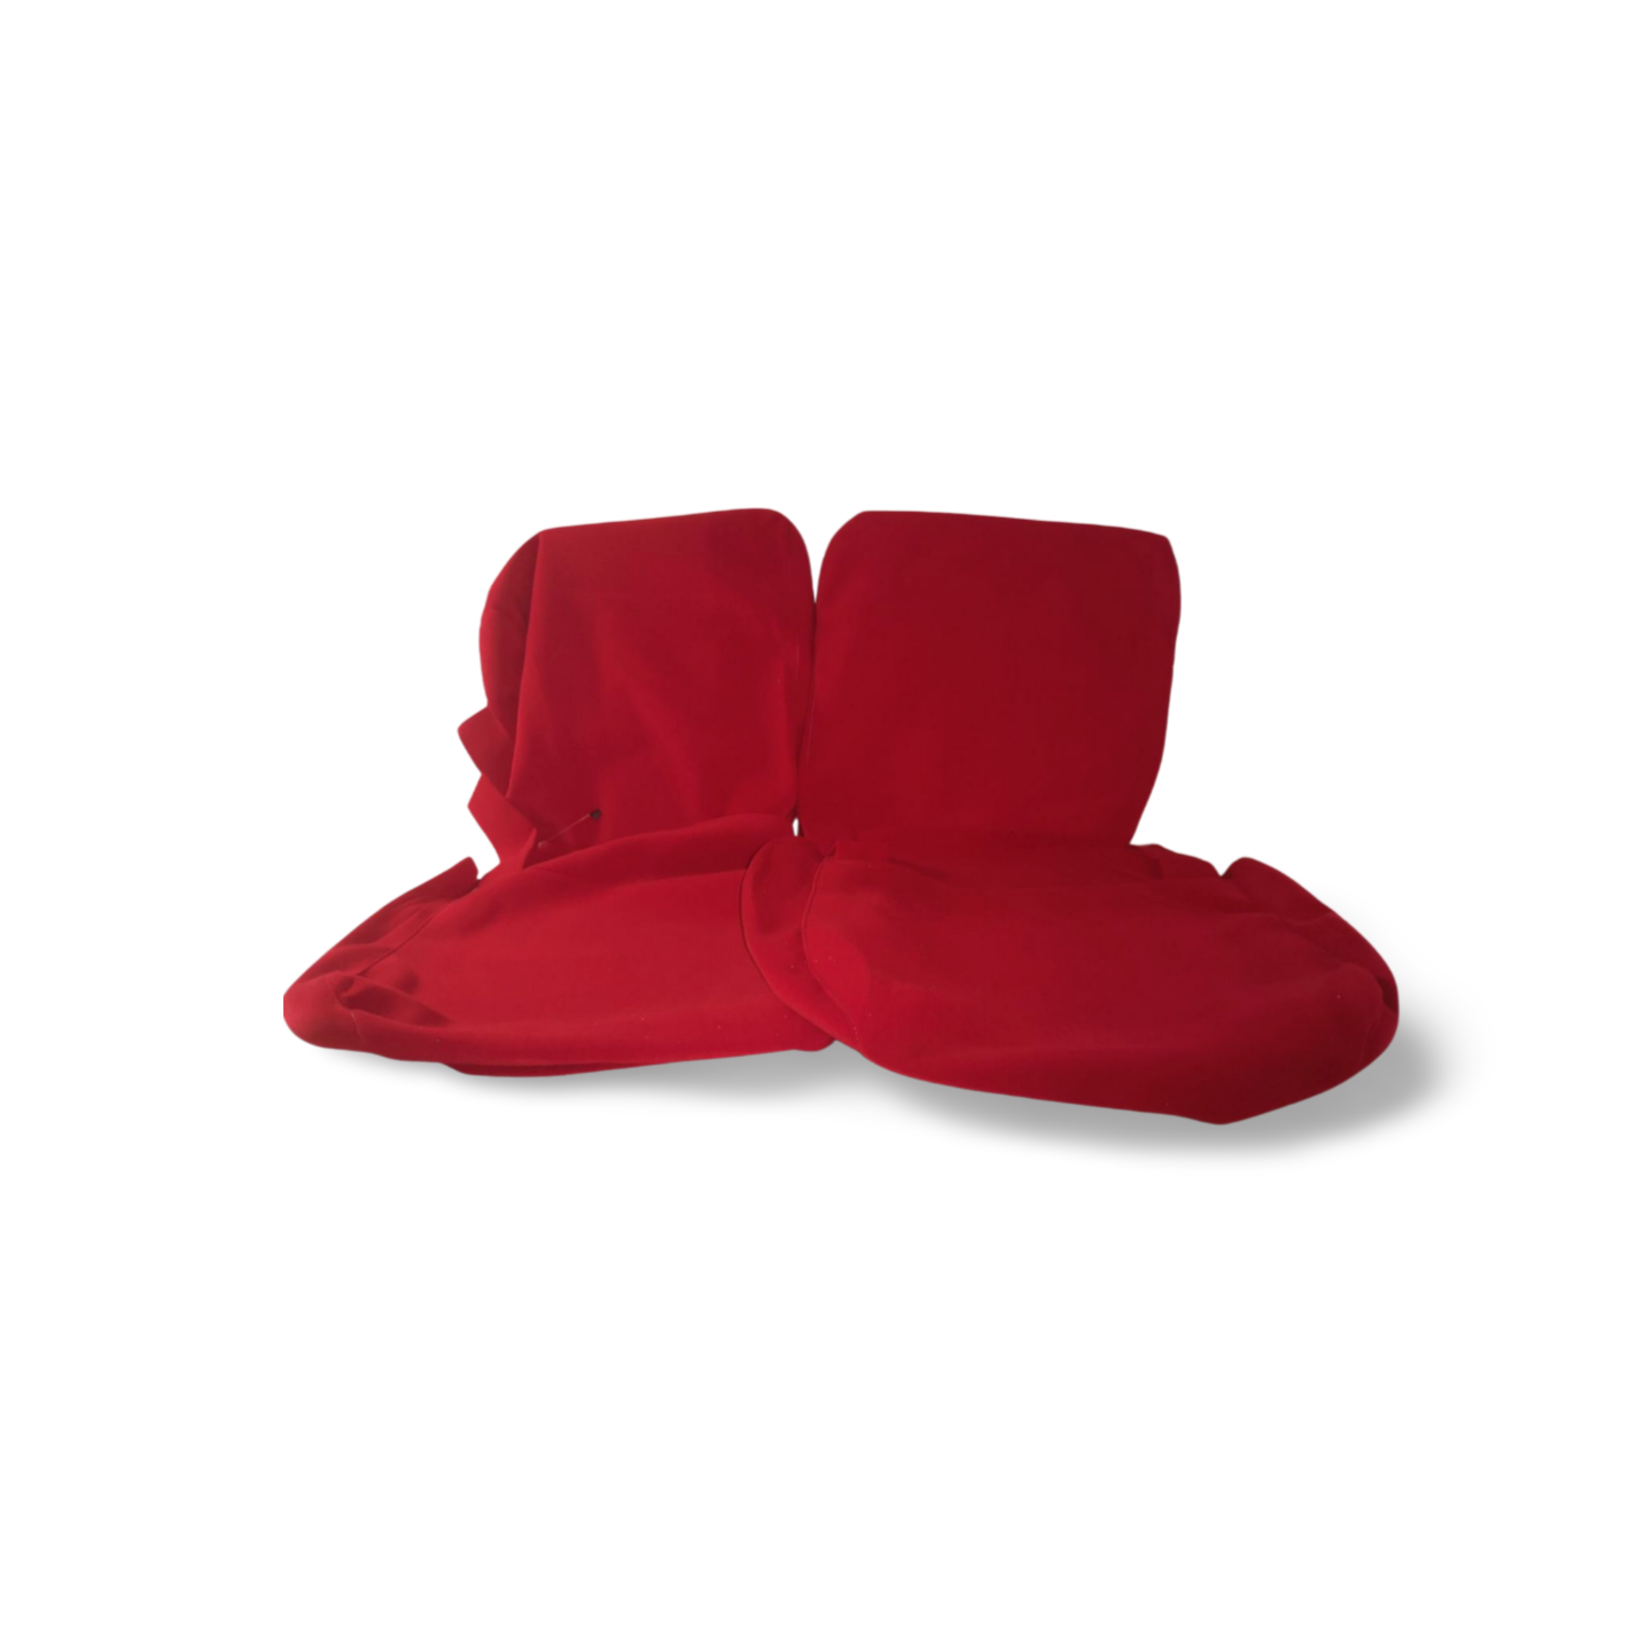 Hoesset Jersey rood 16/74 (met achterbank armsteun 20cm) non Pallas -07/62 Nr Org: Interior - Image 16/74